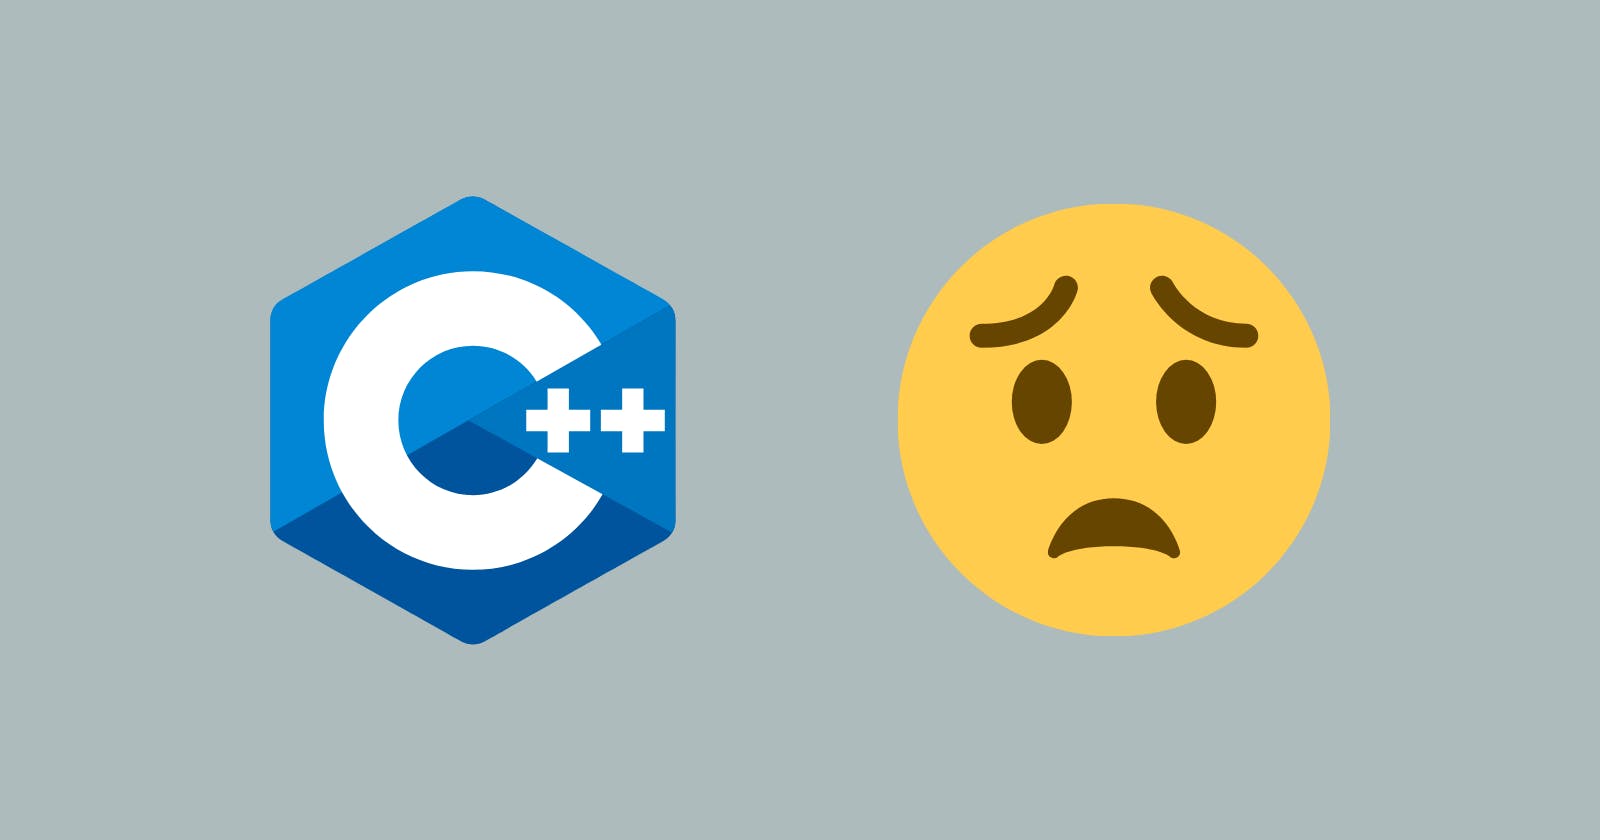 Why You Should Be Worried About the Future of C/C++ in Embedded: A Case for Rust